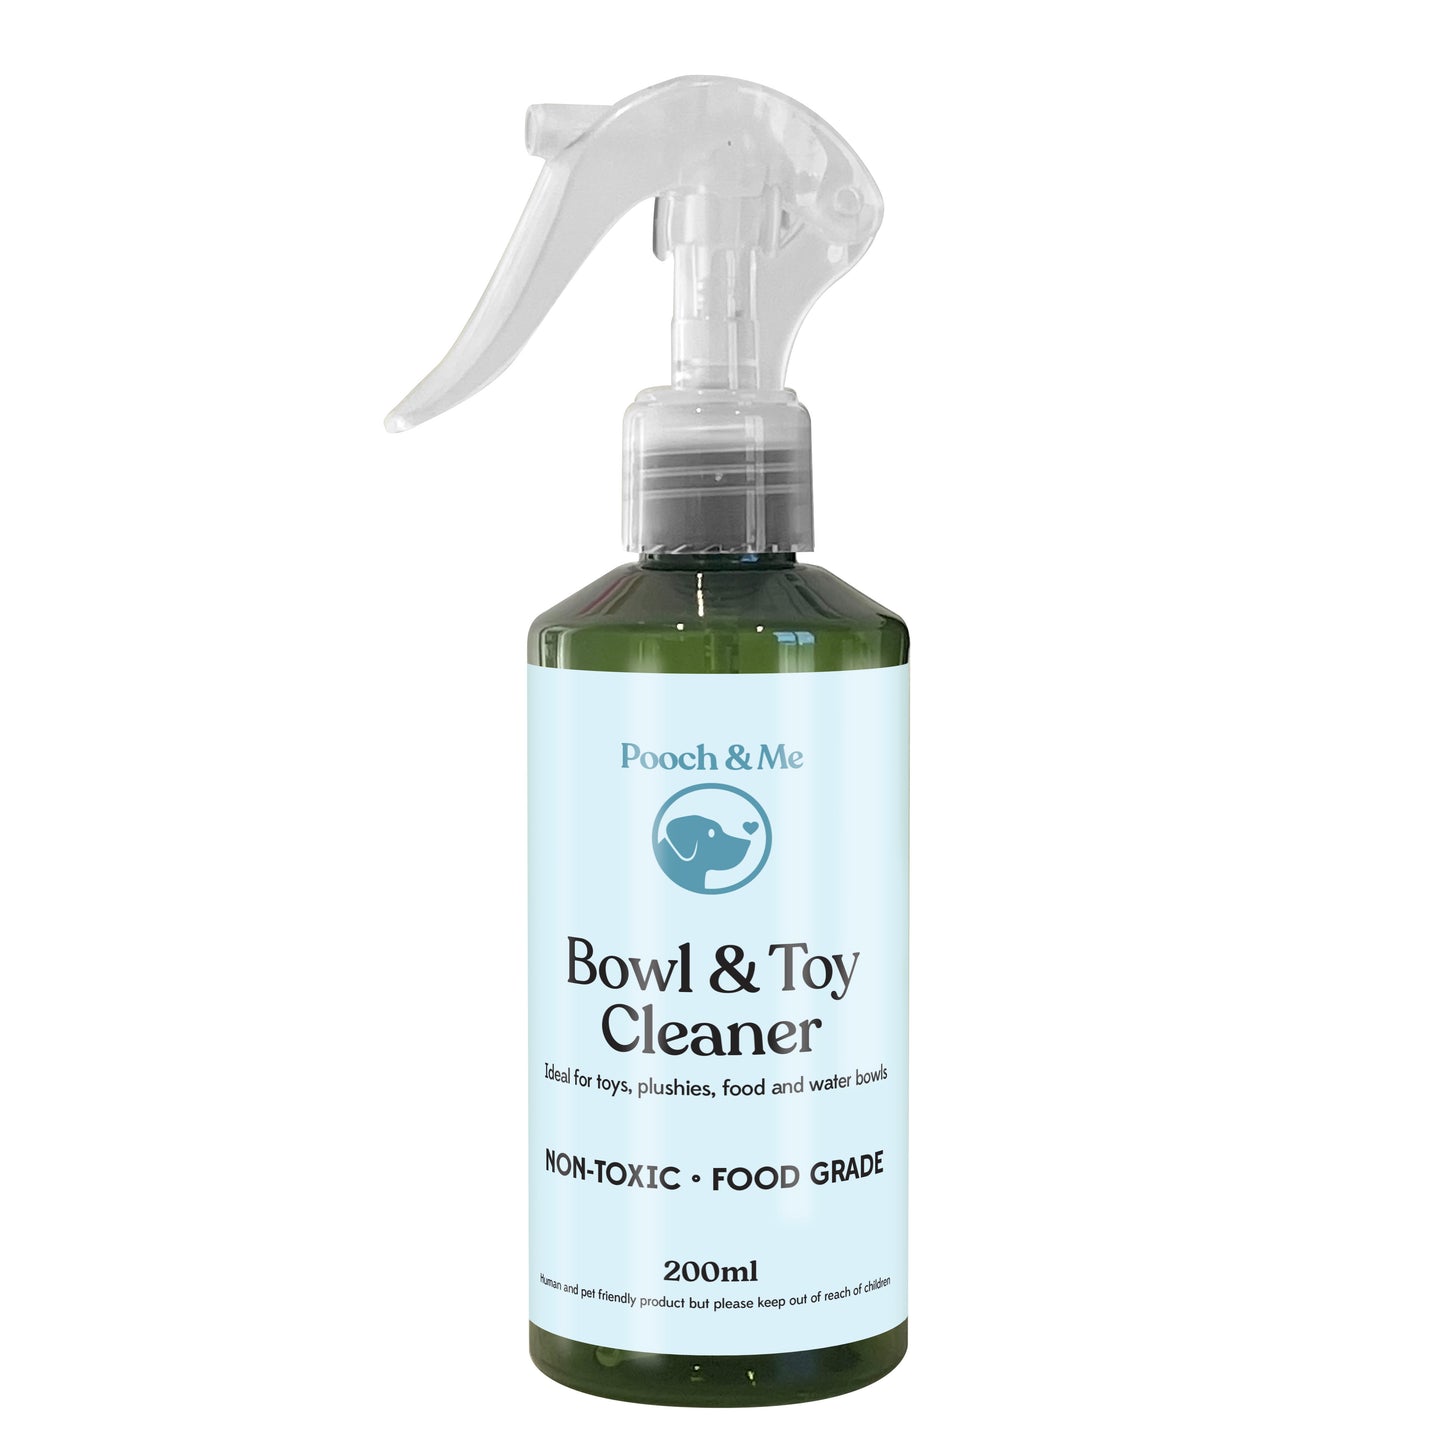 Bowl & Toy Cleaner